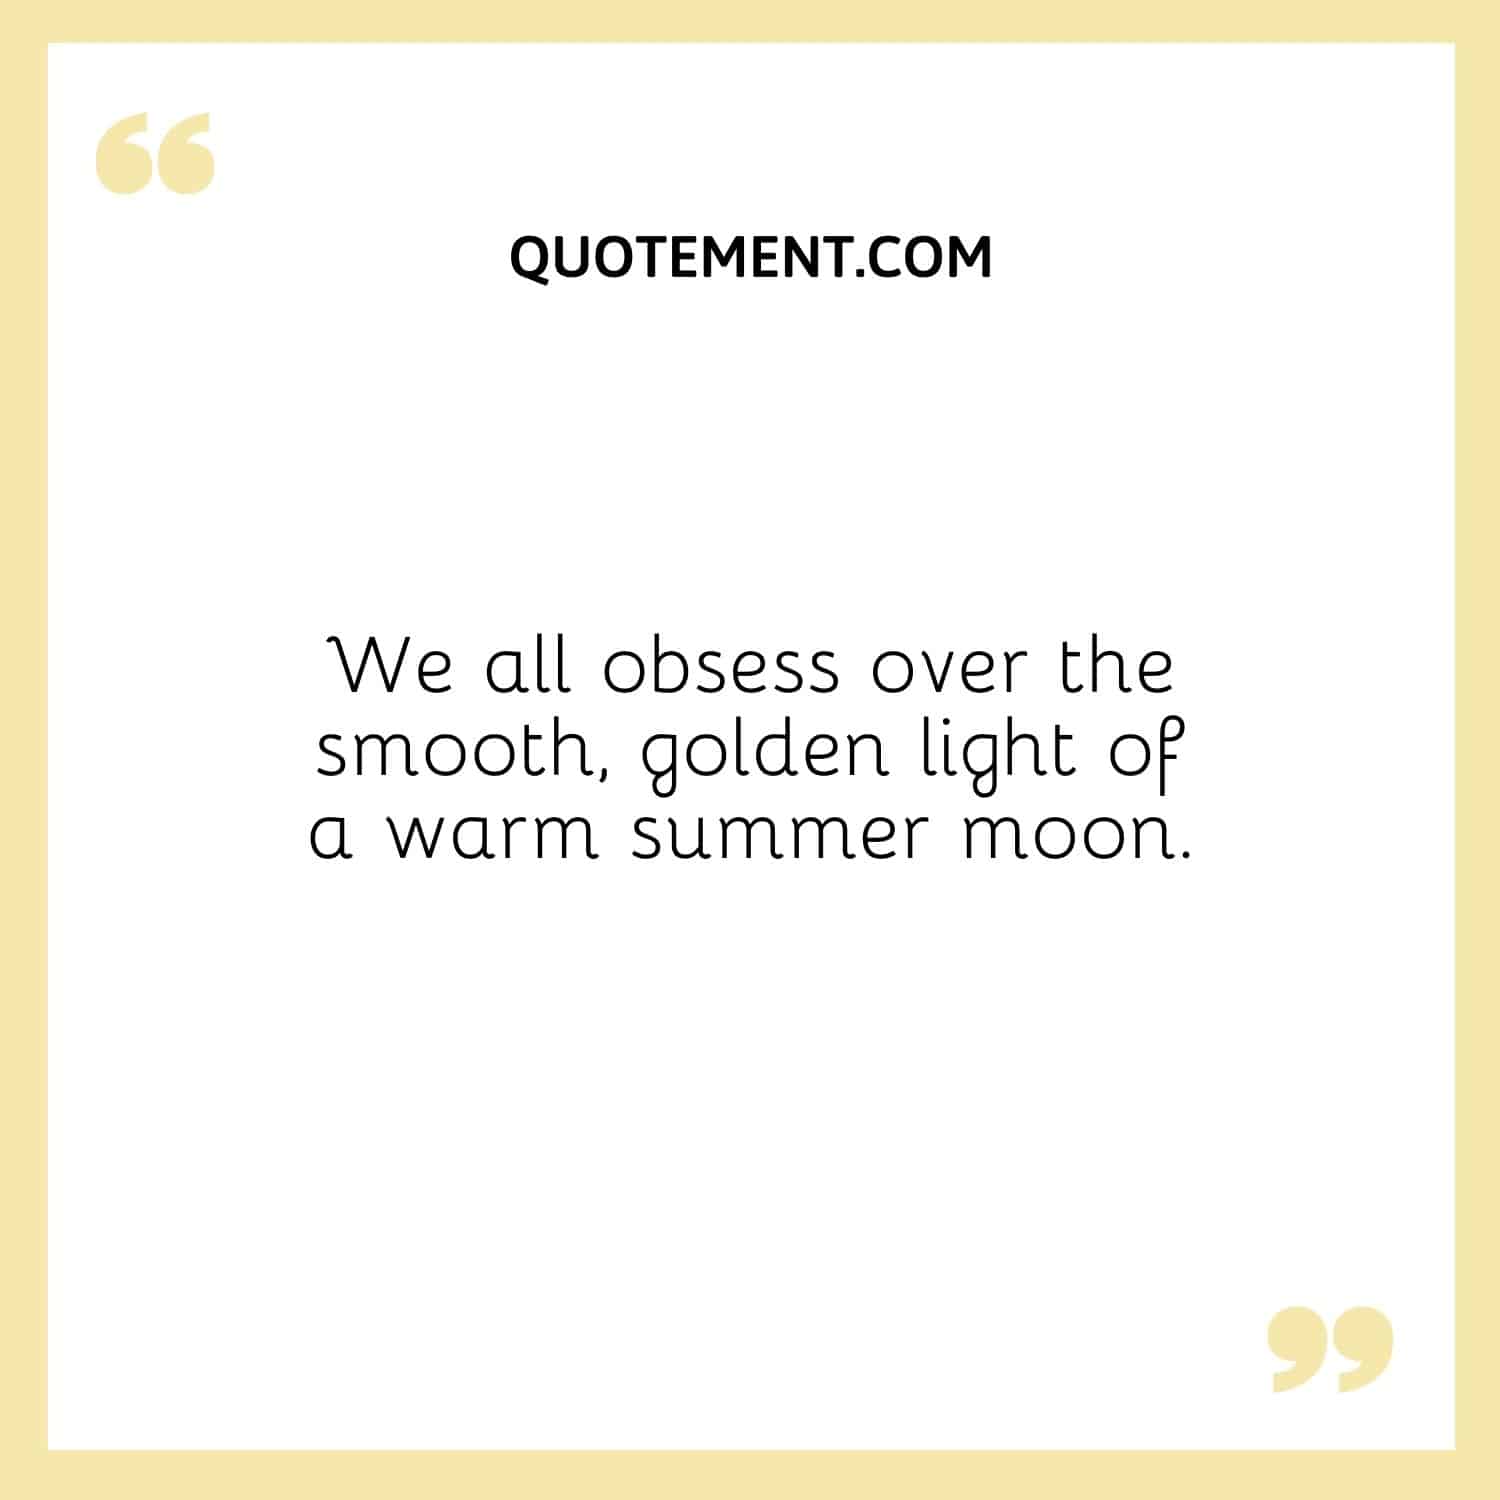 We all obsess over the smooth, golden light of a warm summer moon.